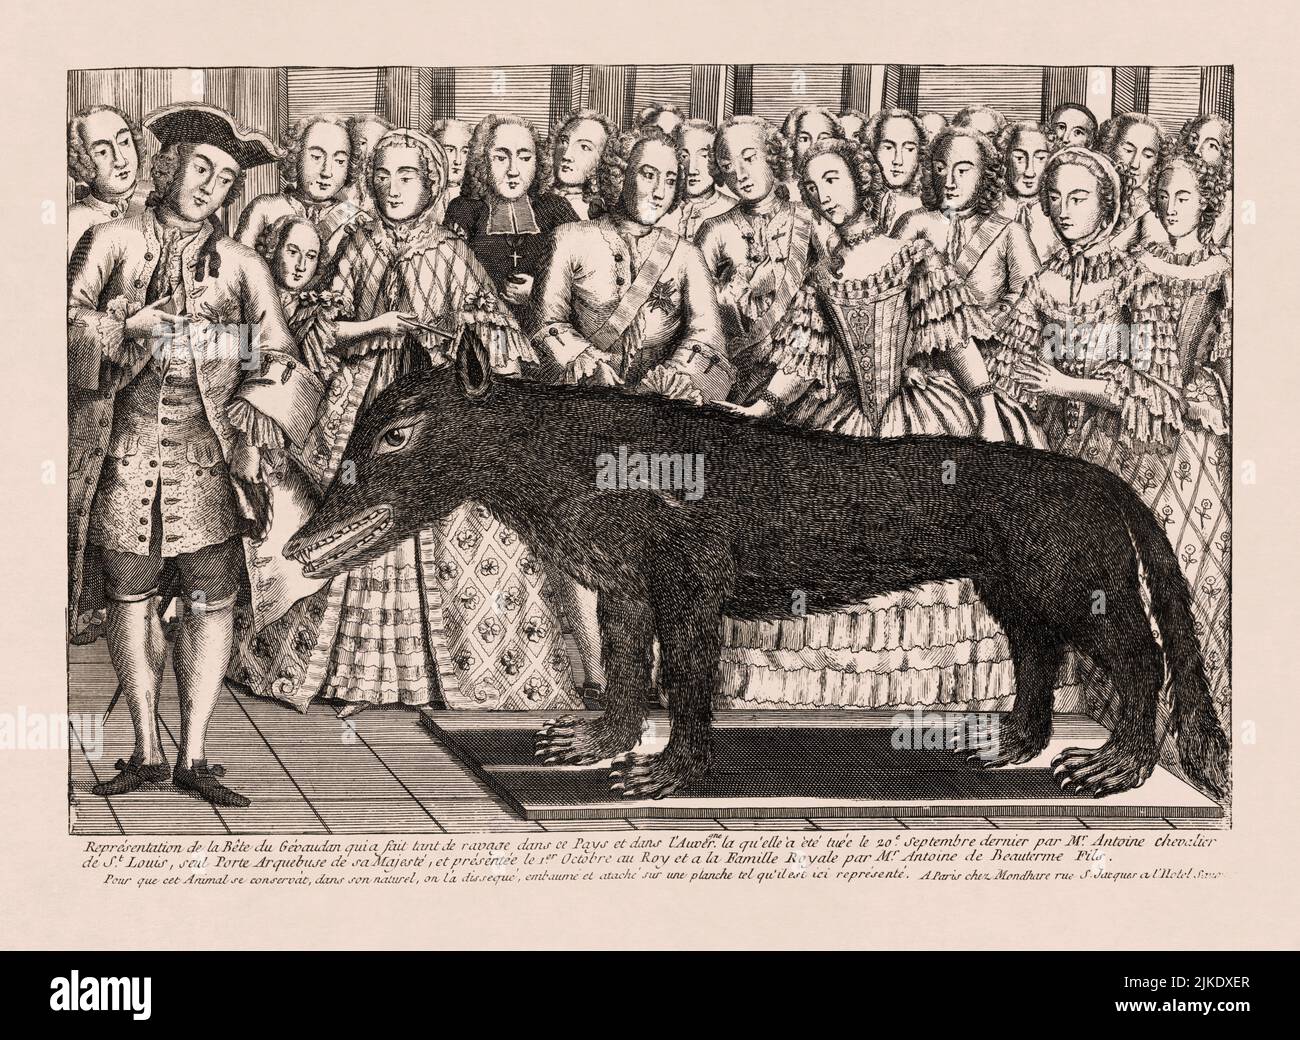 Wolf of Chazes, shot by M. François Antoine de Beauterne, displayed at the court of Louis XV. The copper engraving dating from 1765 during the facts. Stock Photo